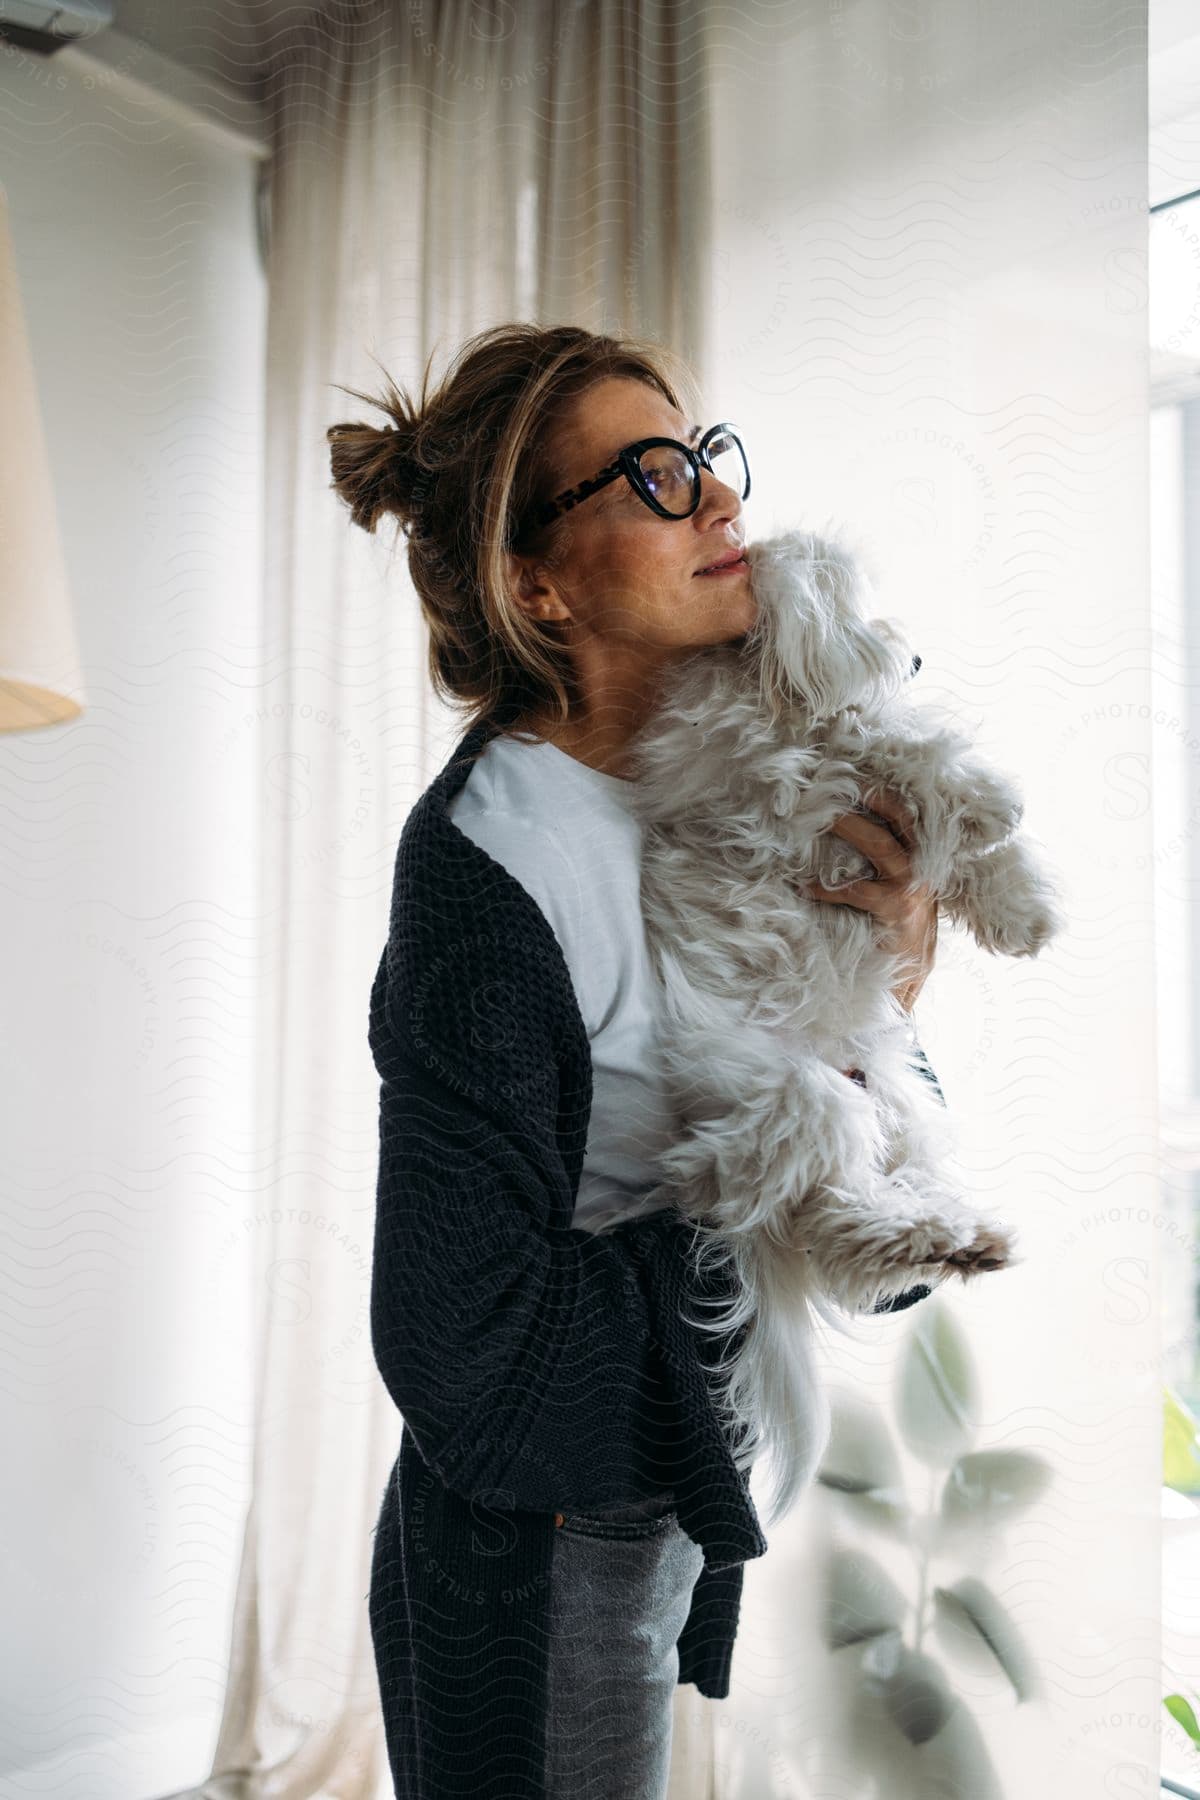 Woman in glasses and black sweater holding a white dog indoors.